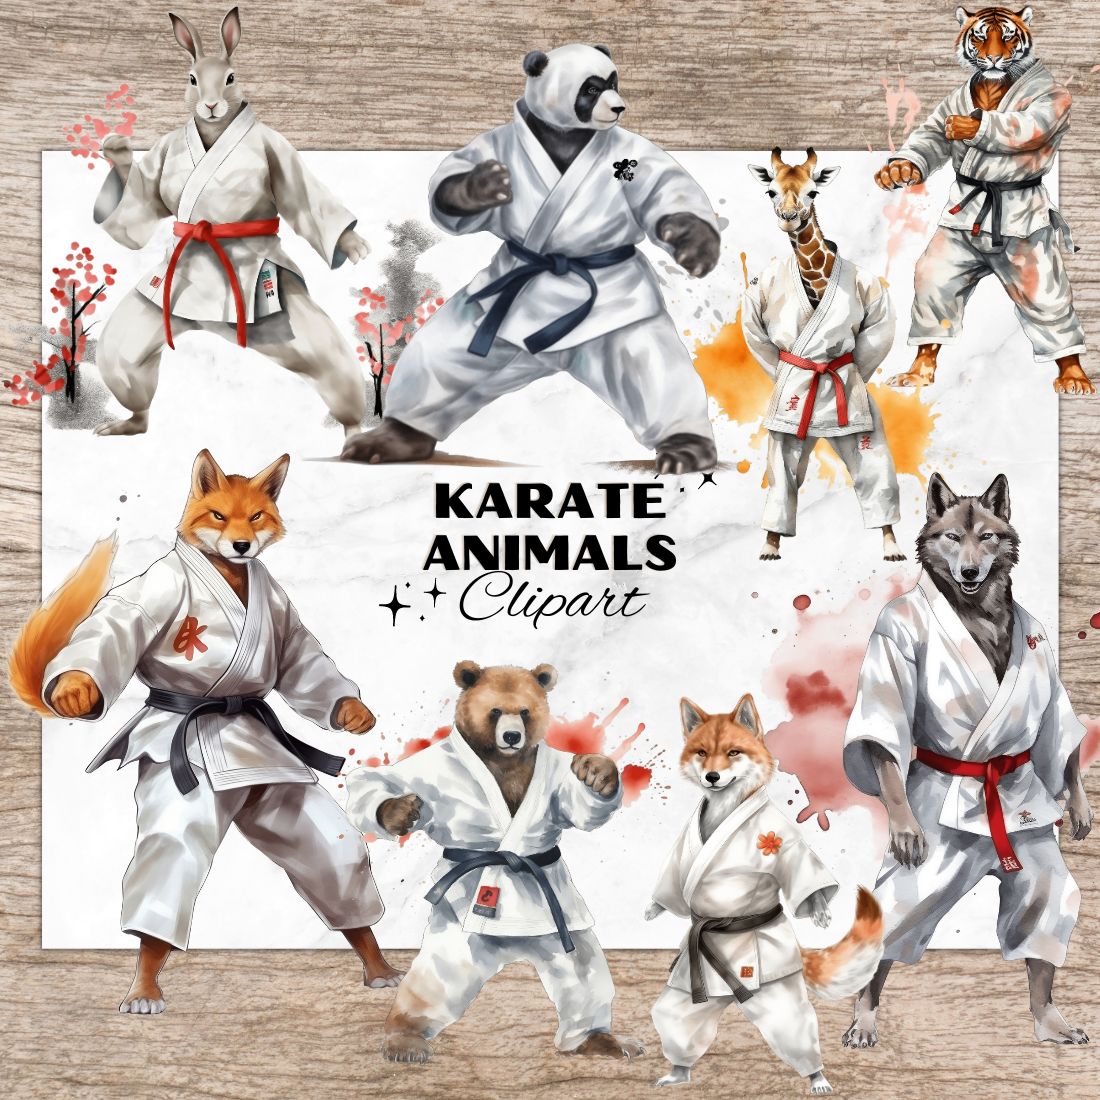 14 Karate Animal PNG, Animals Watercolor Clipart, Animals in Karate Suit, Transparent PNG, Digital Paper Craft, Watercolor Clipart for Scrapbook, Invitation, Wall Art, T-Shirt Design cover image.